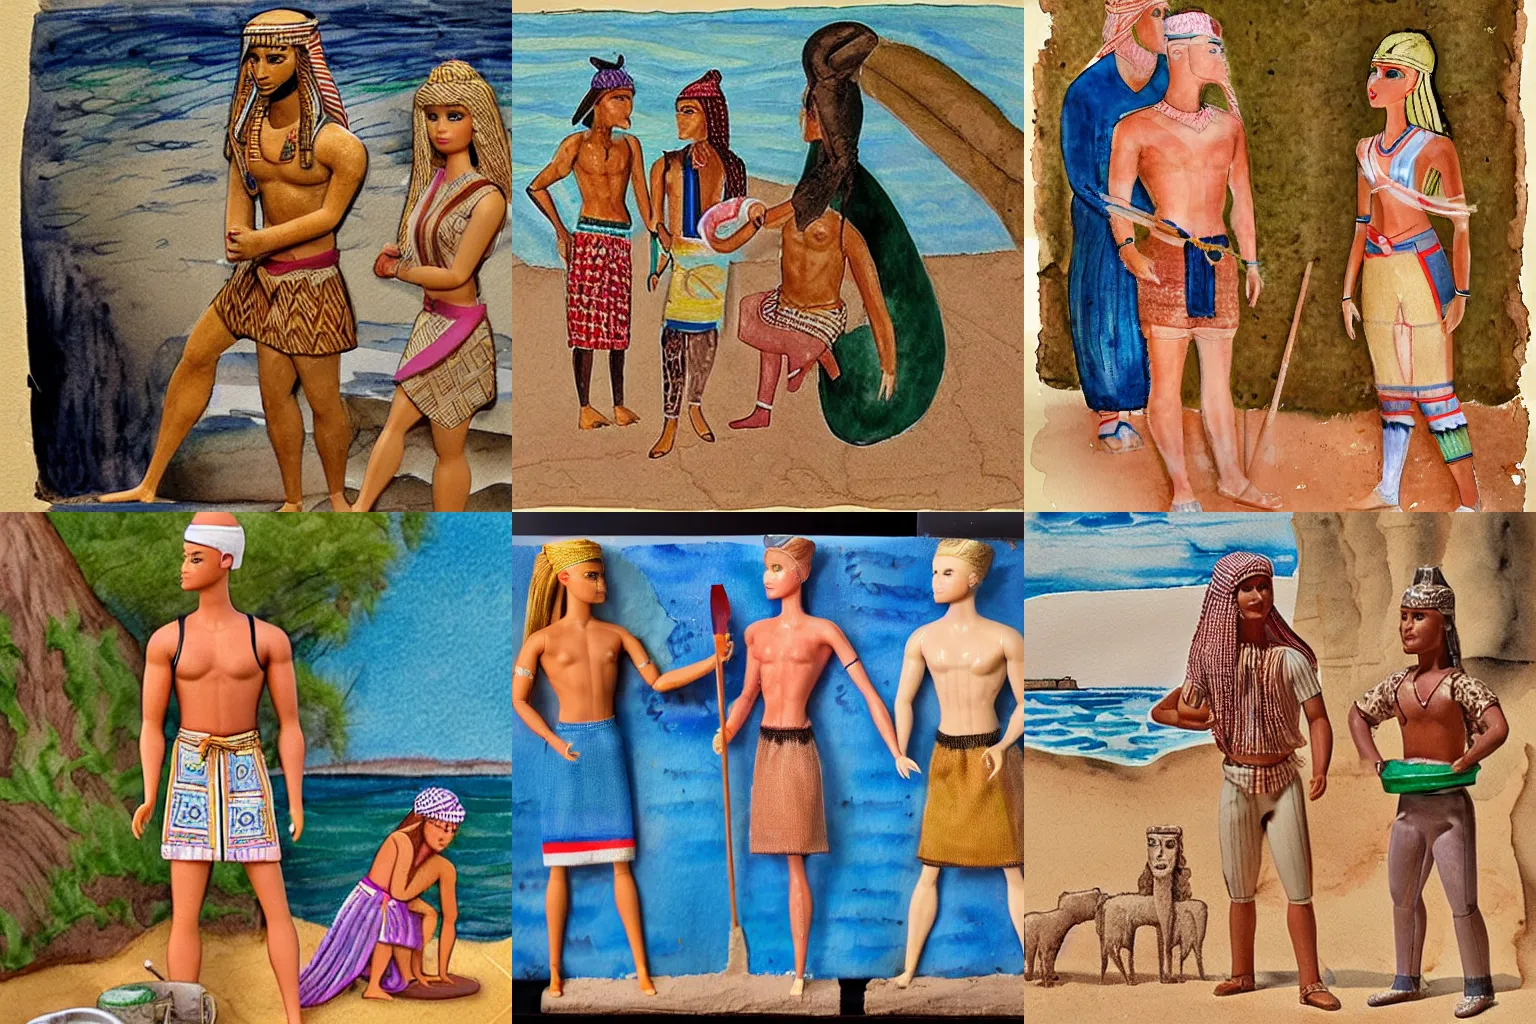 Prompt: Barbie or Ken doll, fishermen, by the shore, realistic, watercolor and ink, art in the style of Mesopotamia 3000 to 4000 BCE and Protoliterate period, art by Yahya ibn Mahmud al-Wasiti and Firyal Al-Adhamy